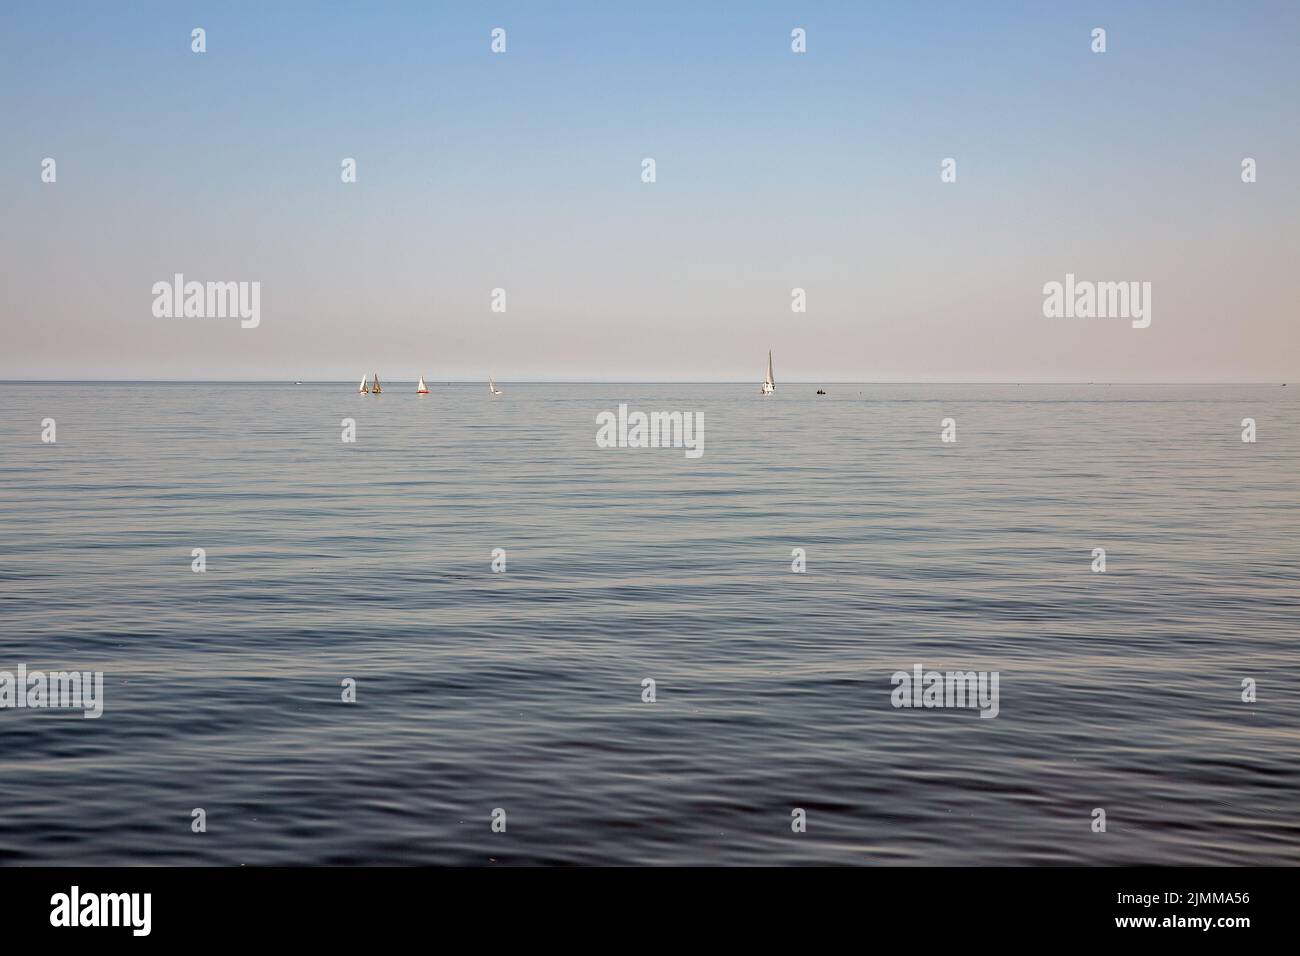 Sea of Azow peaceful waterscape with sailboats in Mariupol, Ukraine. Stock Photo